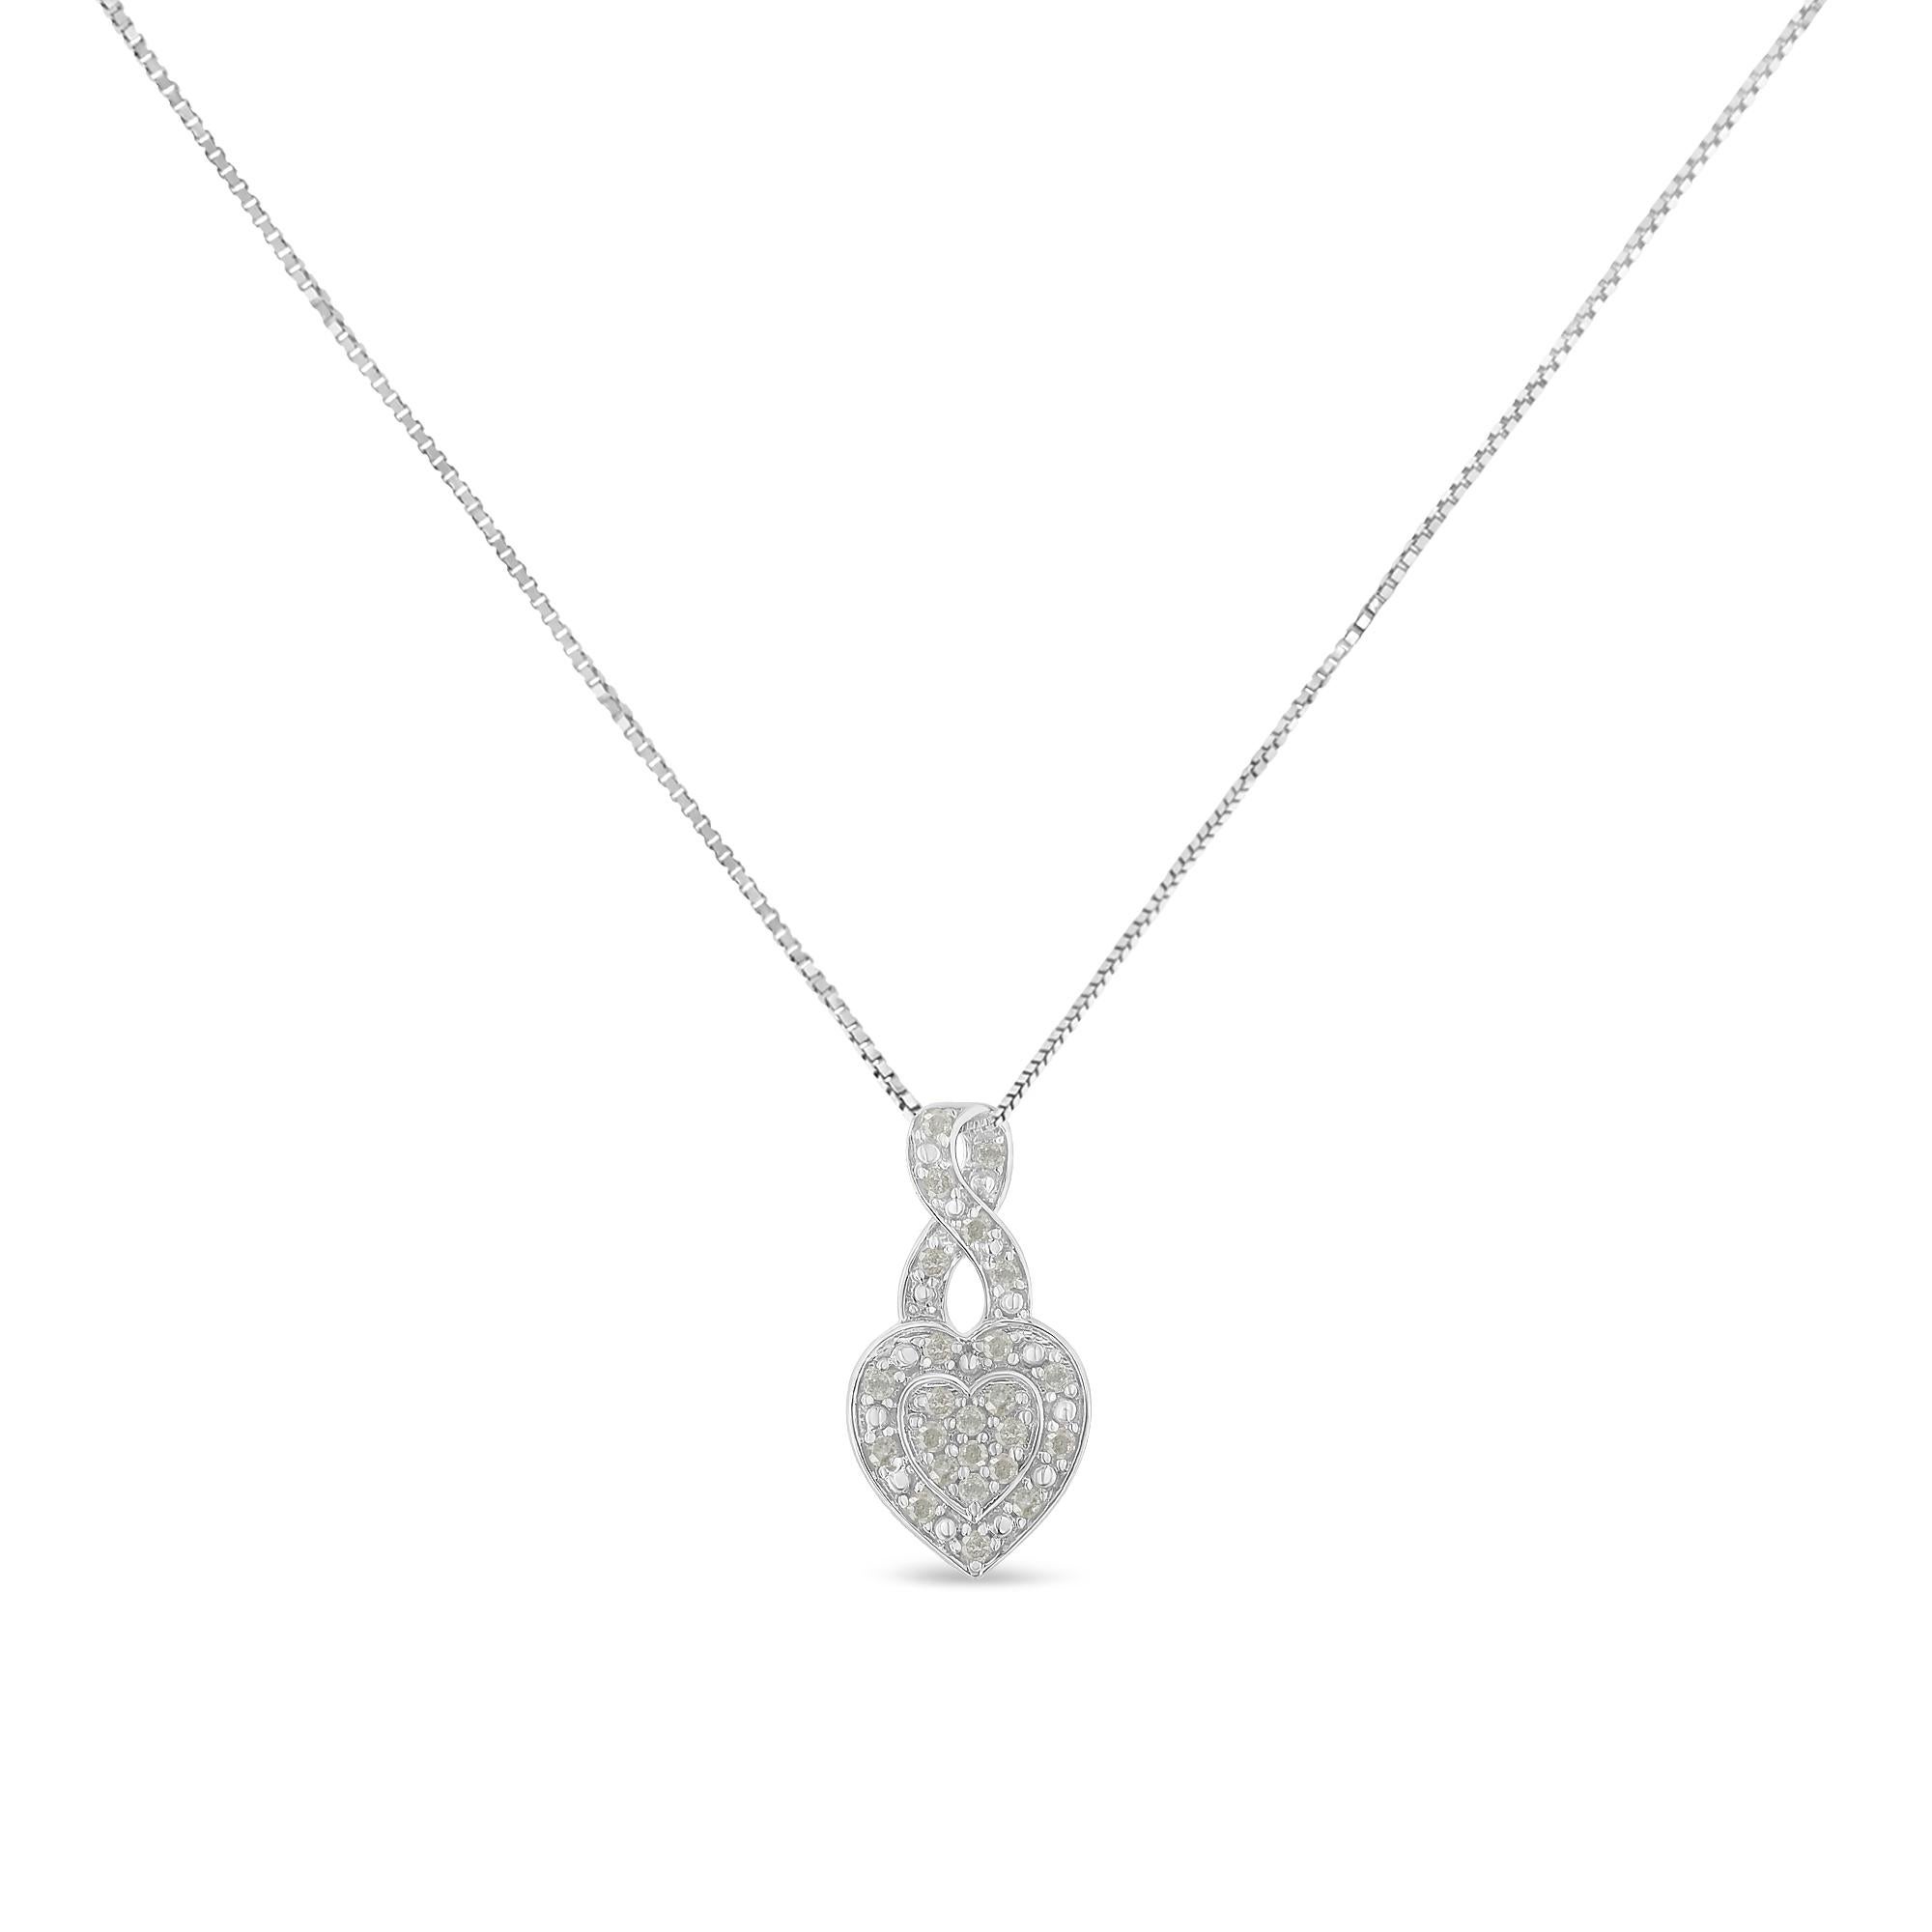 Celebrate someone you love with this stunning diamond heart pendant necklace. This diamond necklace features a knot-style twist suspending a heart shape all filled with round, rose-cut, promo quality diamonds, which are milky and cloudy in nature.